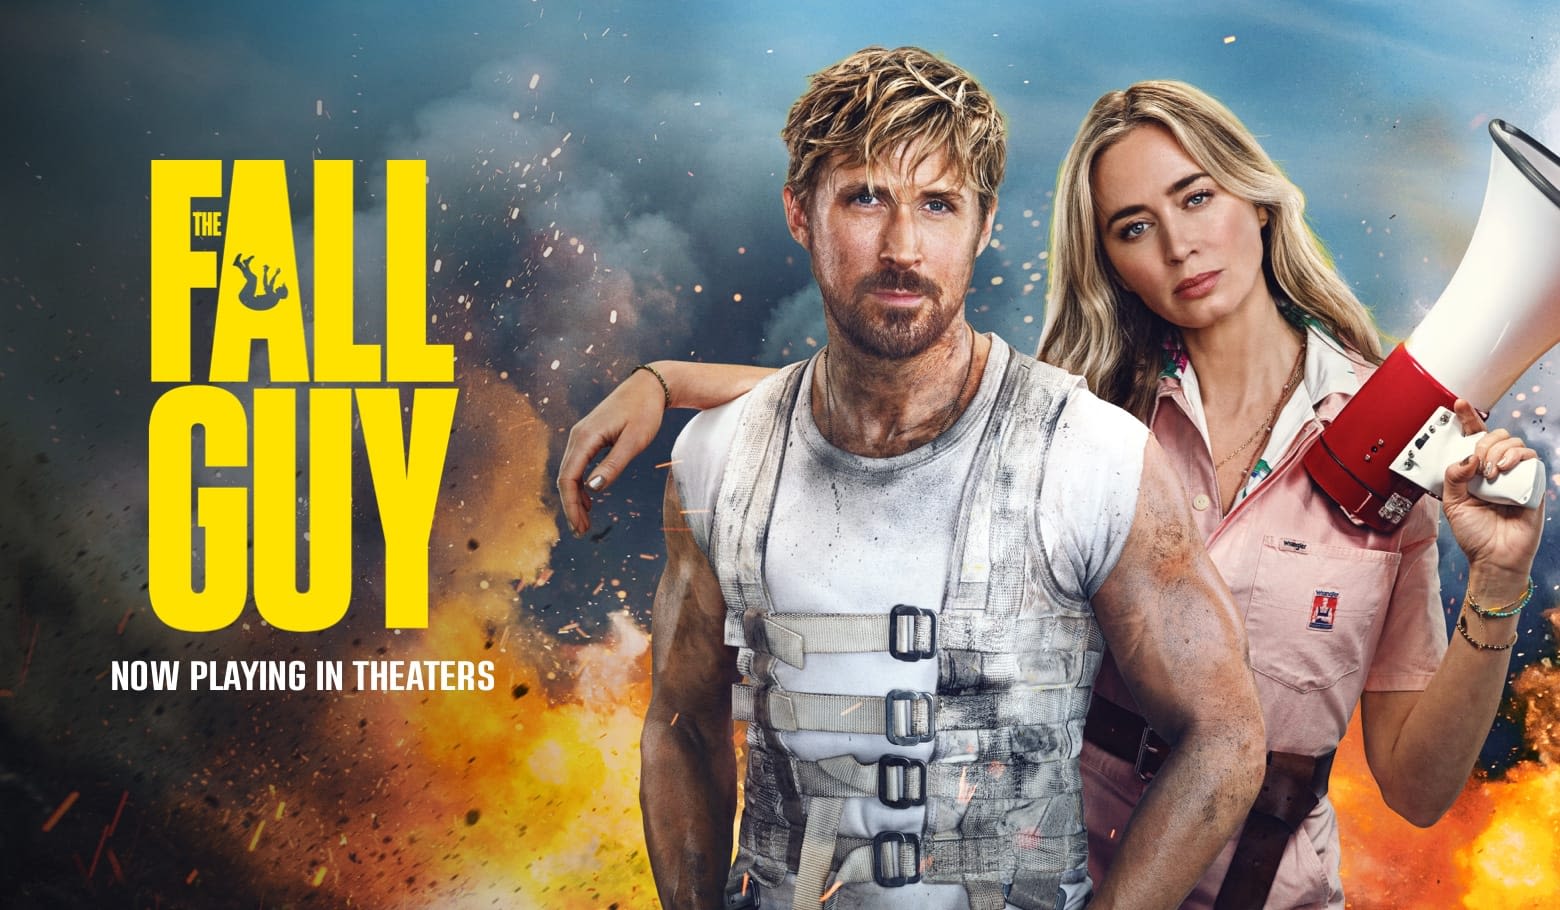 Box Office: "The Fall Guy" Not Connecting with Audiences, Sees $25 Mil Opening Weekend Despite Top Reviews, Solid...